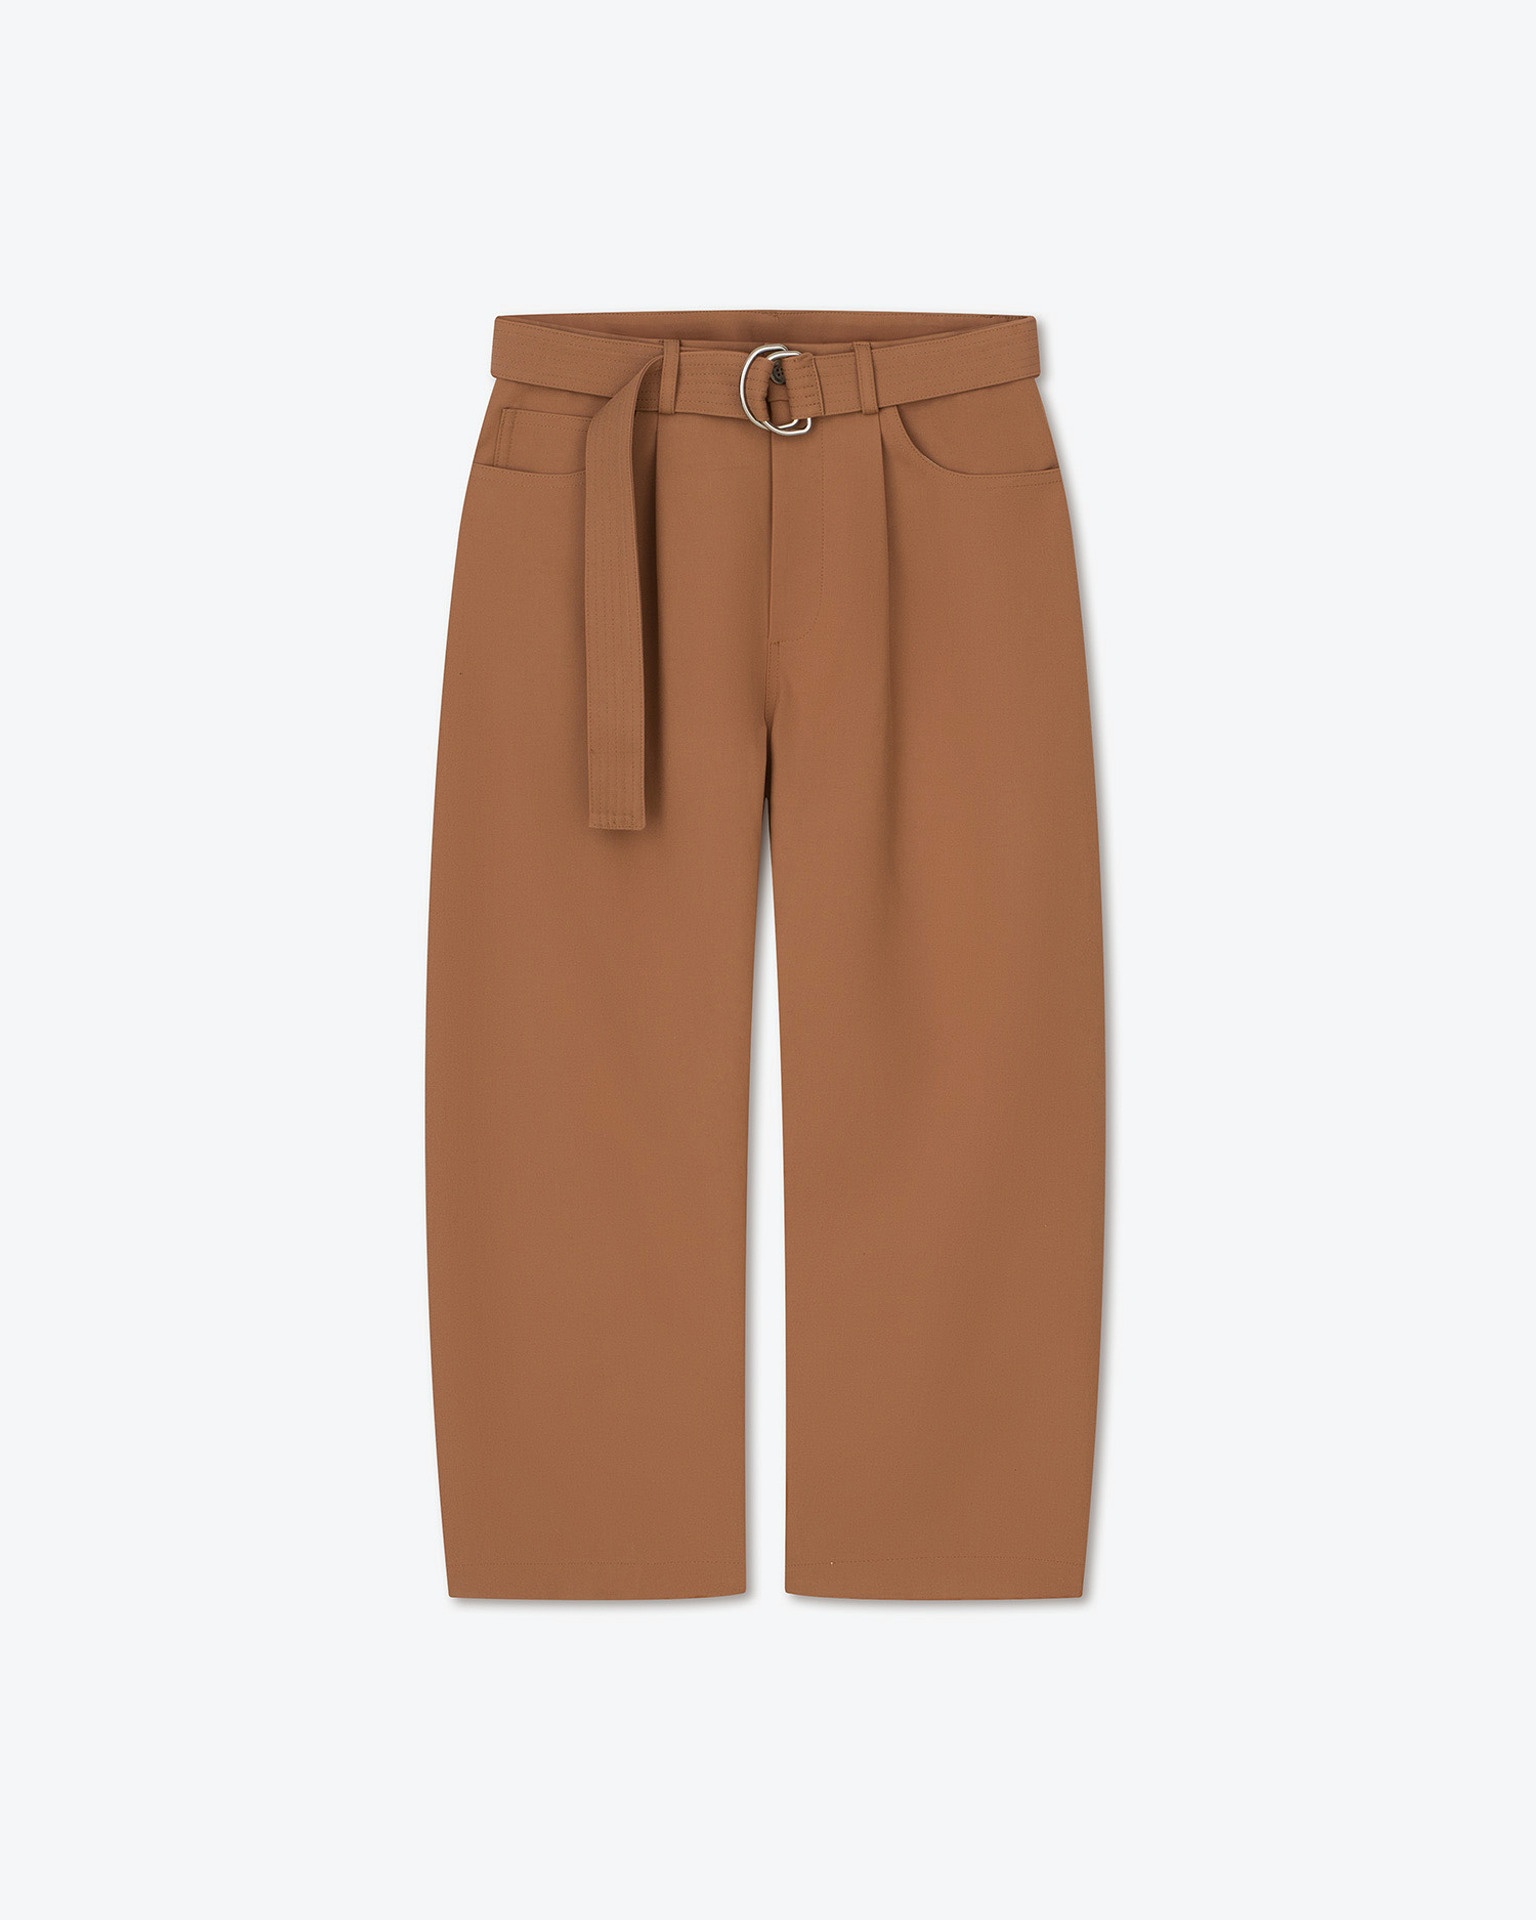 FERRE - Structured twill pants - Rust - 1